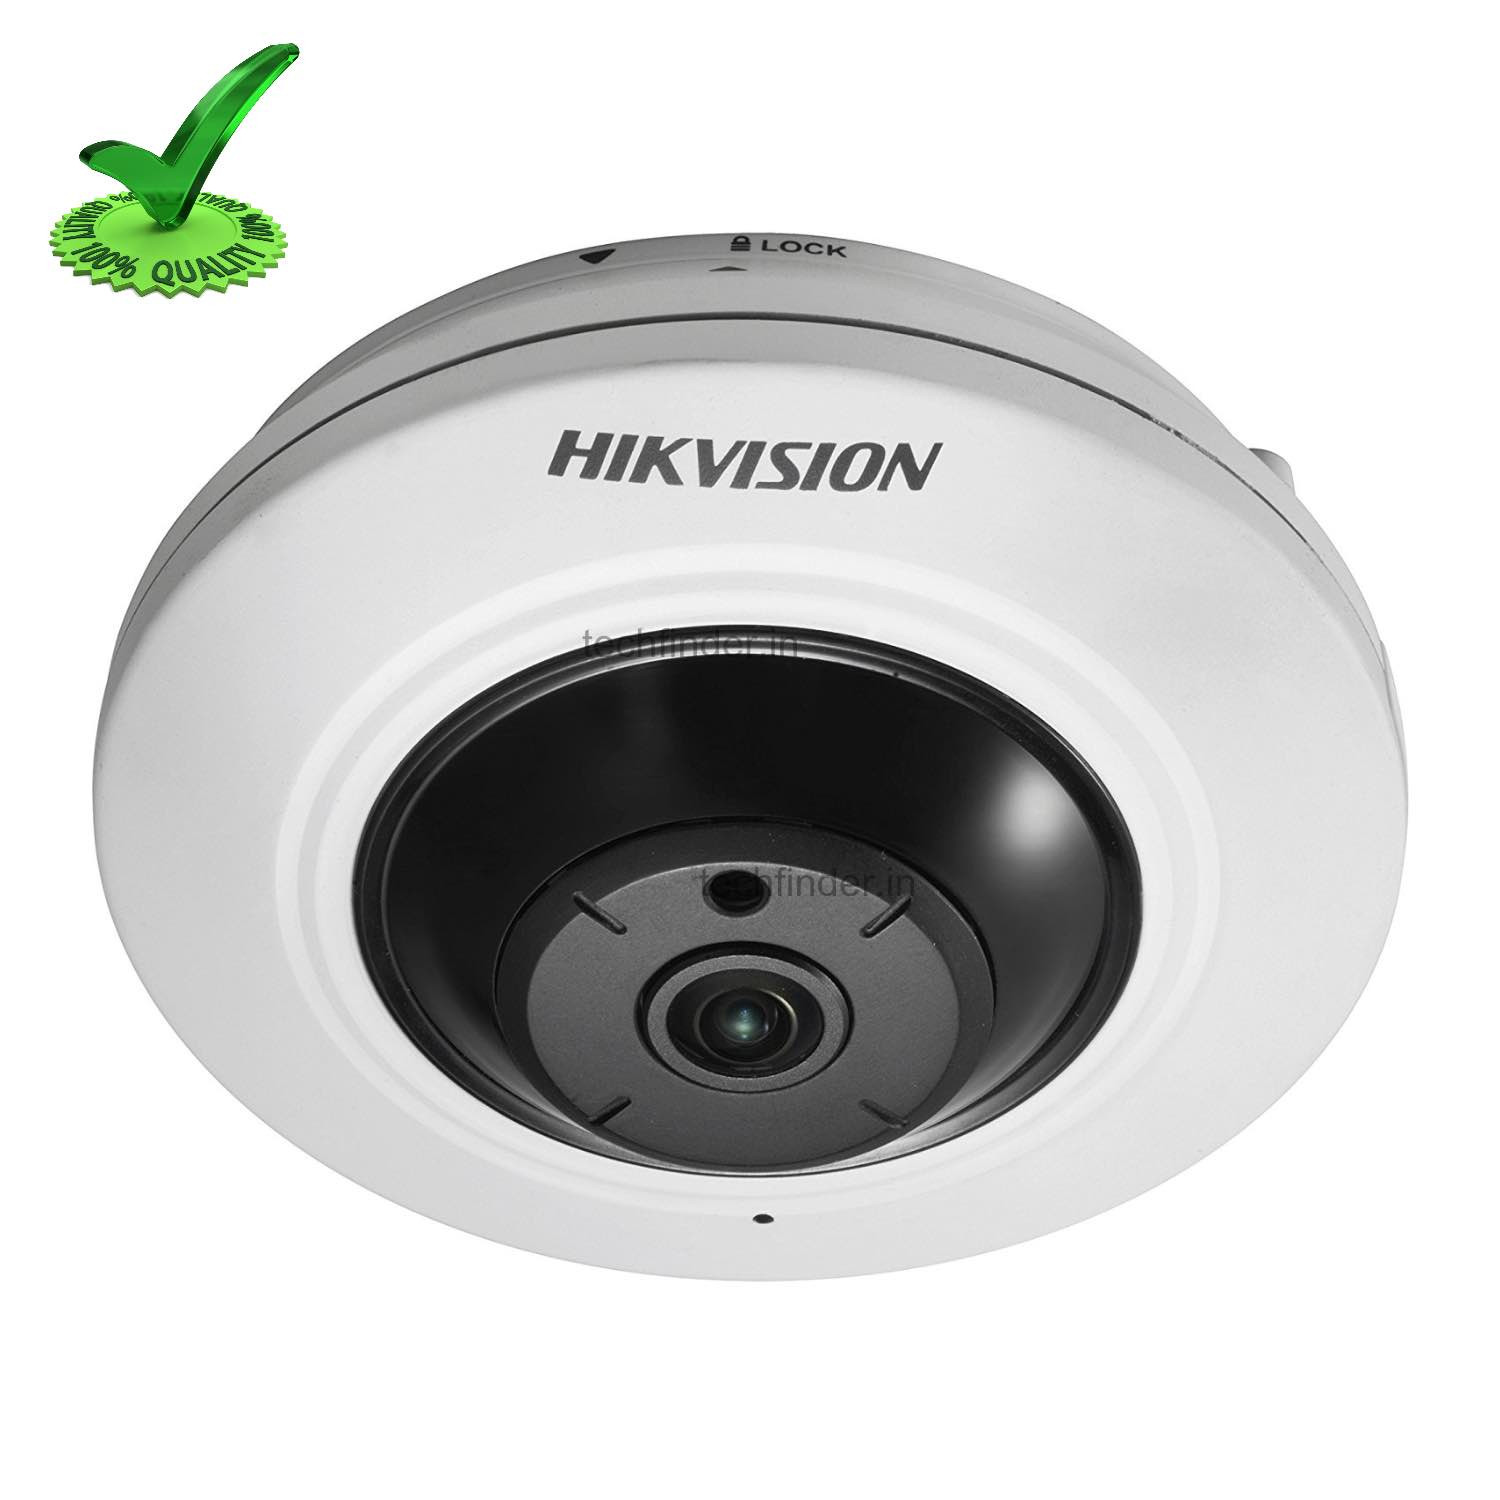 Hikvision DS-2CD2955FWD-I 5MP IP Network Fisheye Camera